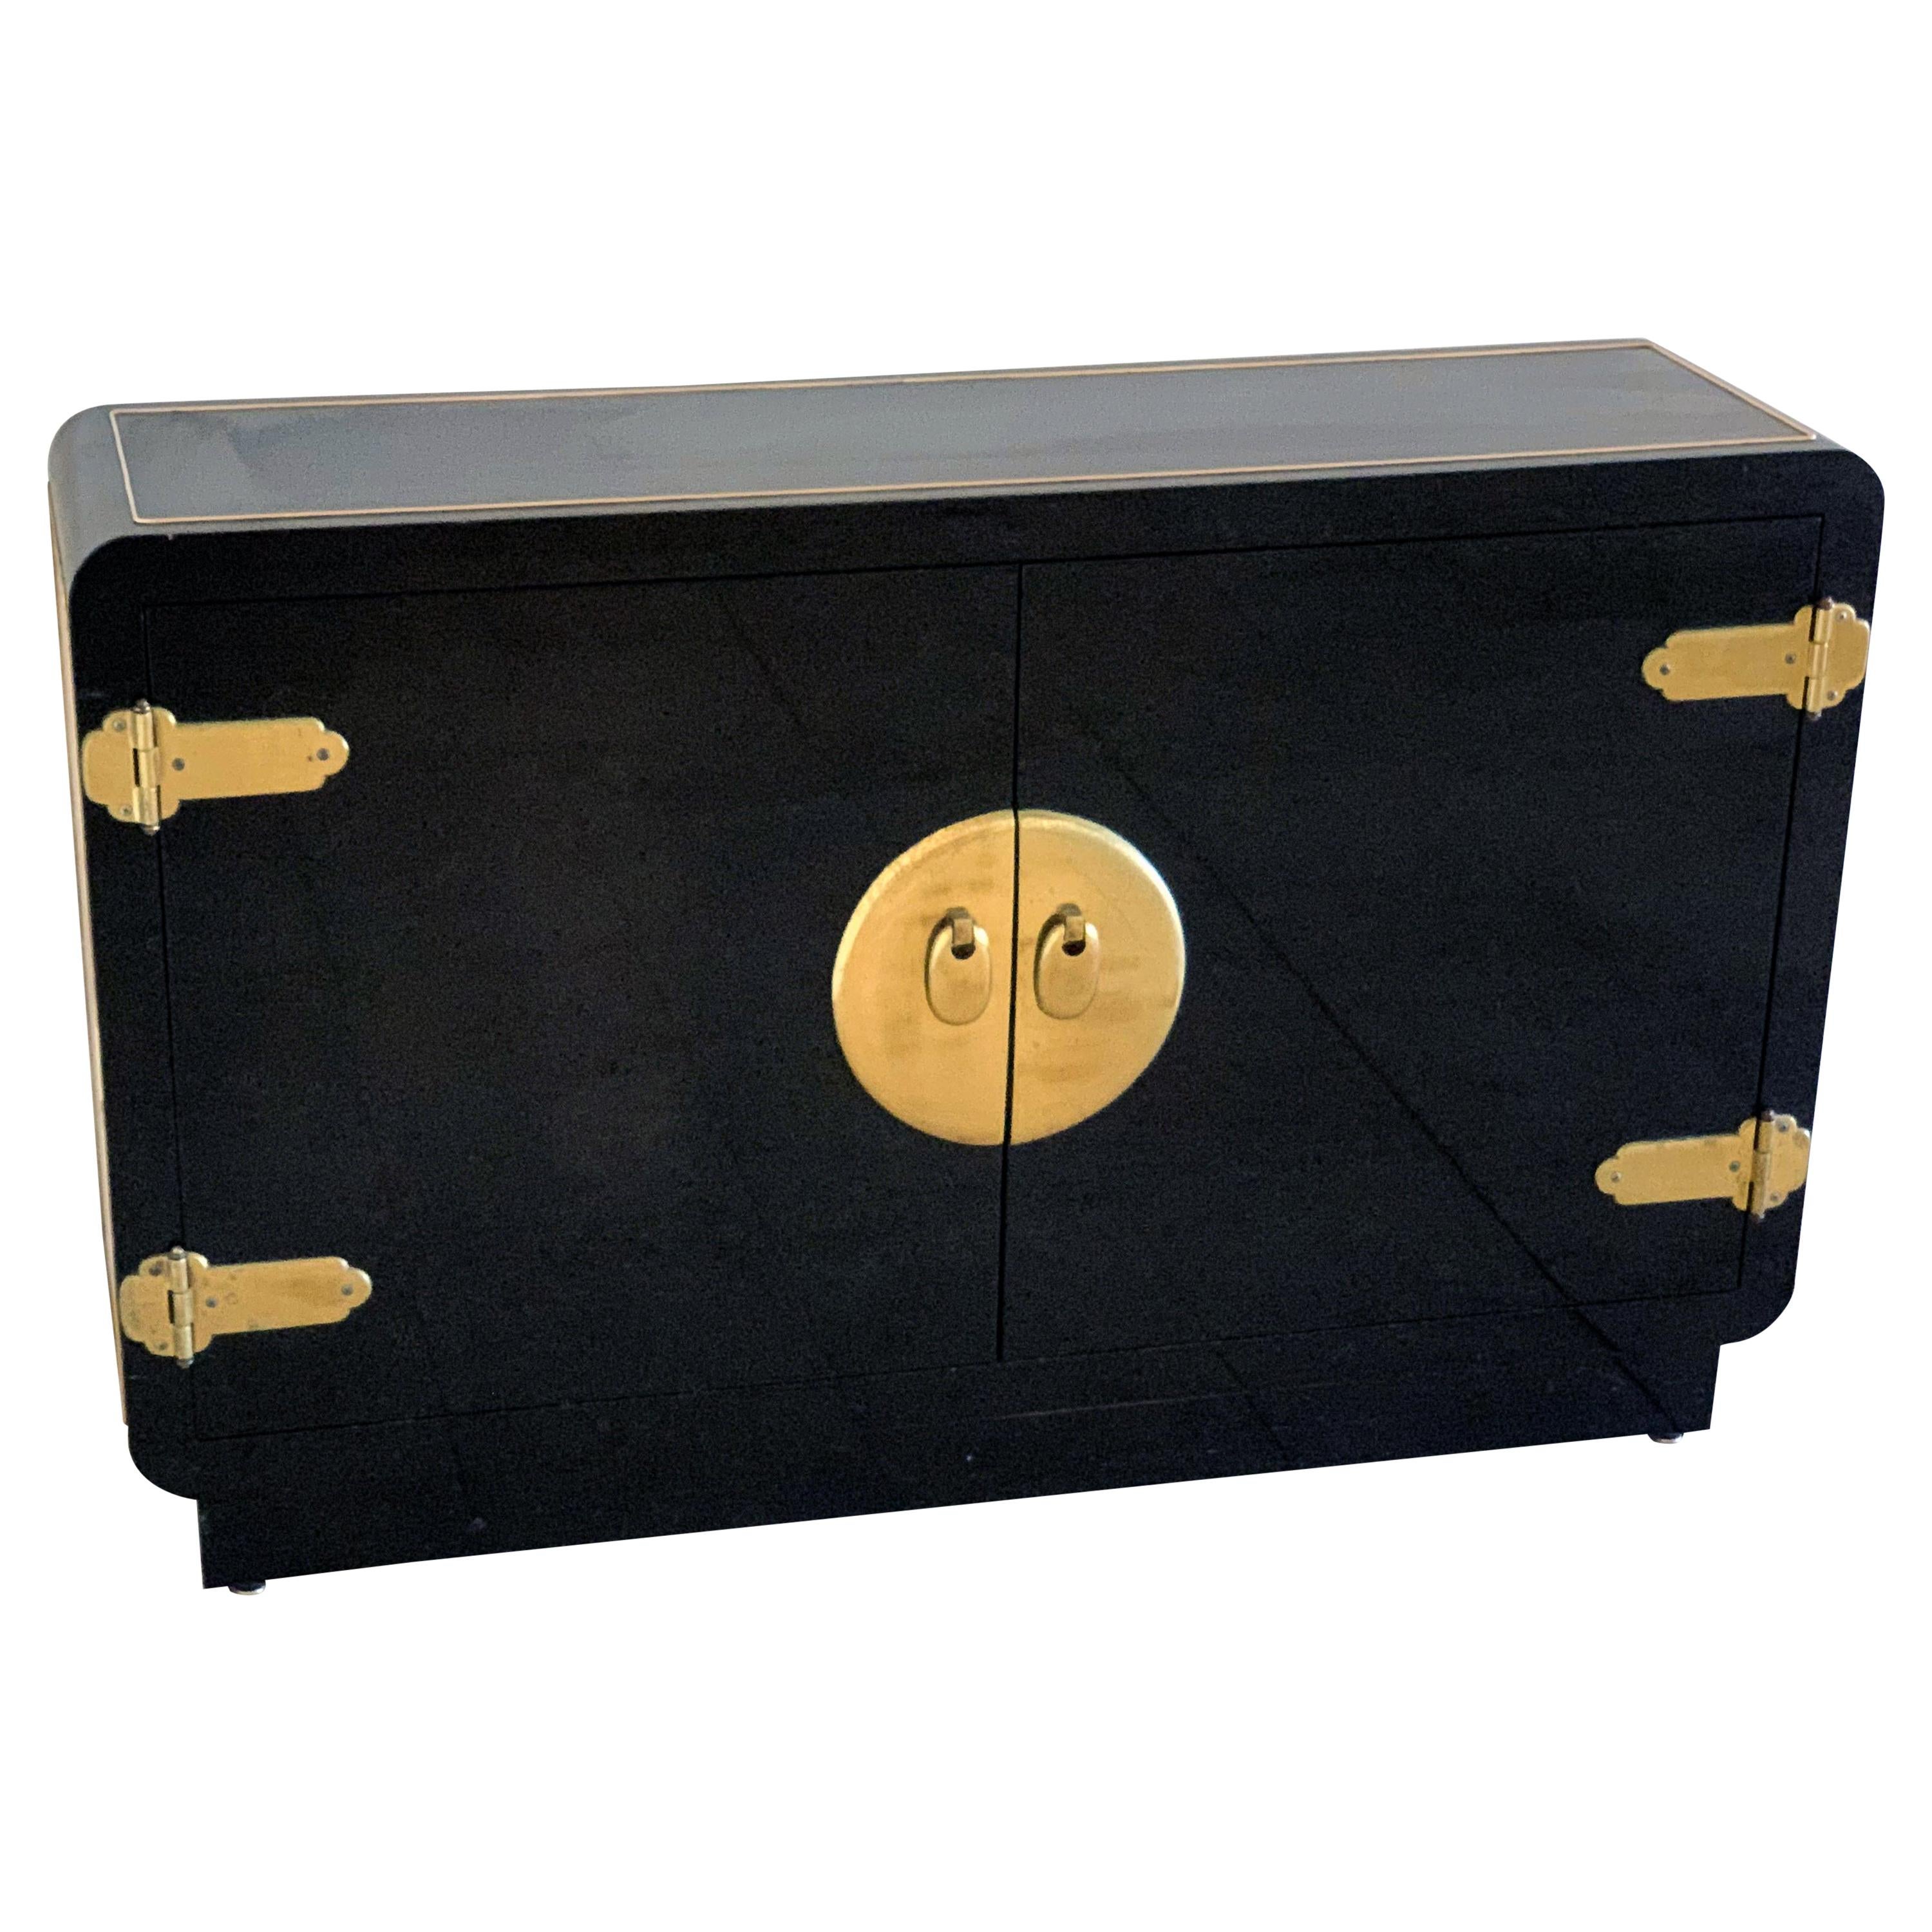 Mastercraft Black Lacquer and Brass Cabinet Credenza